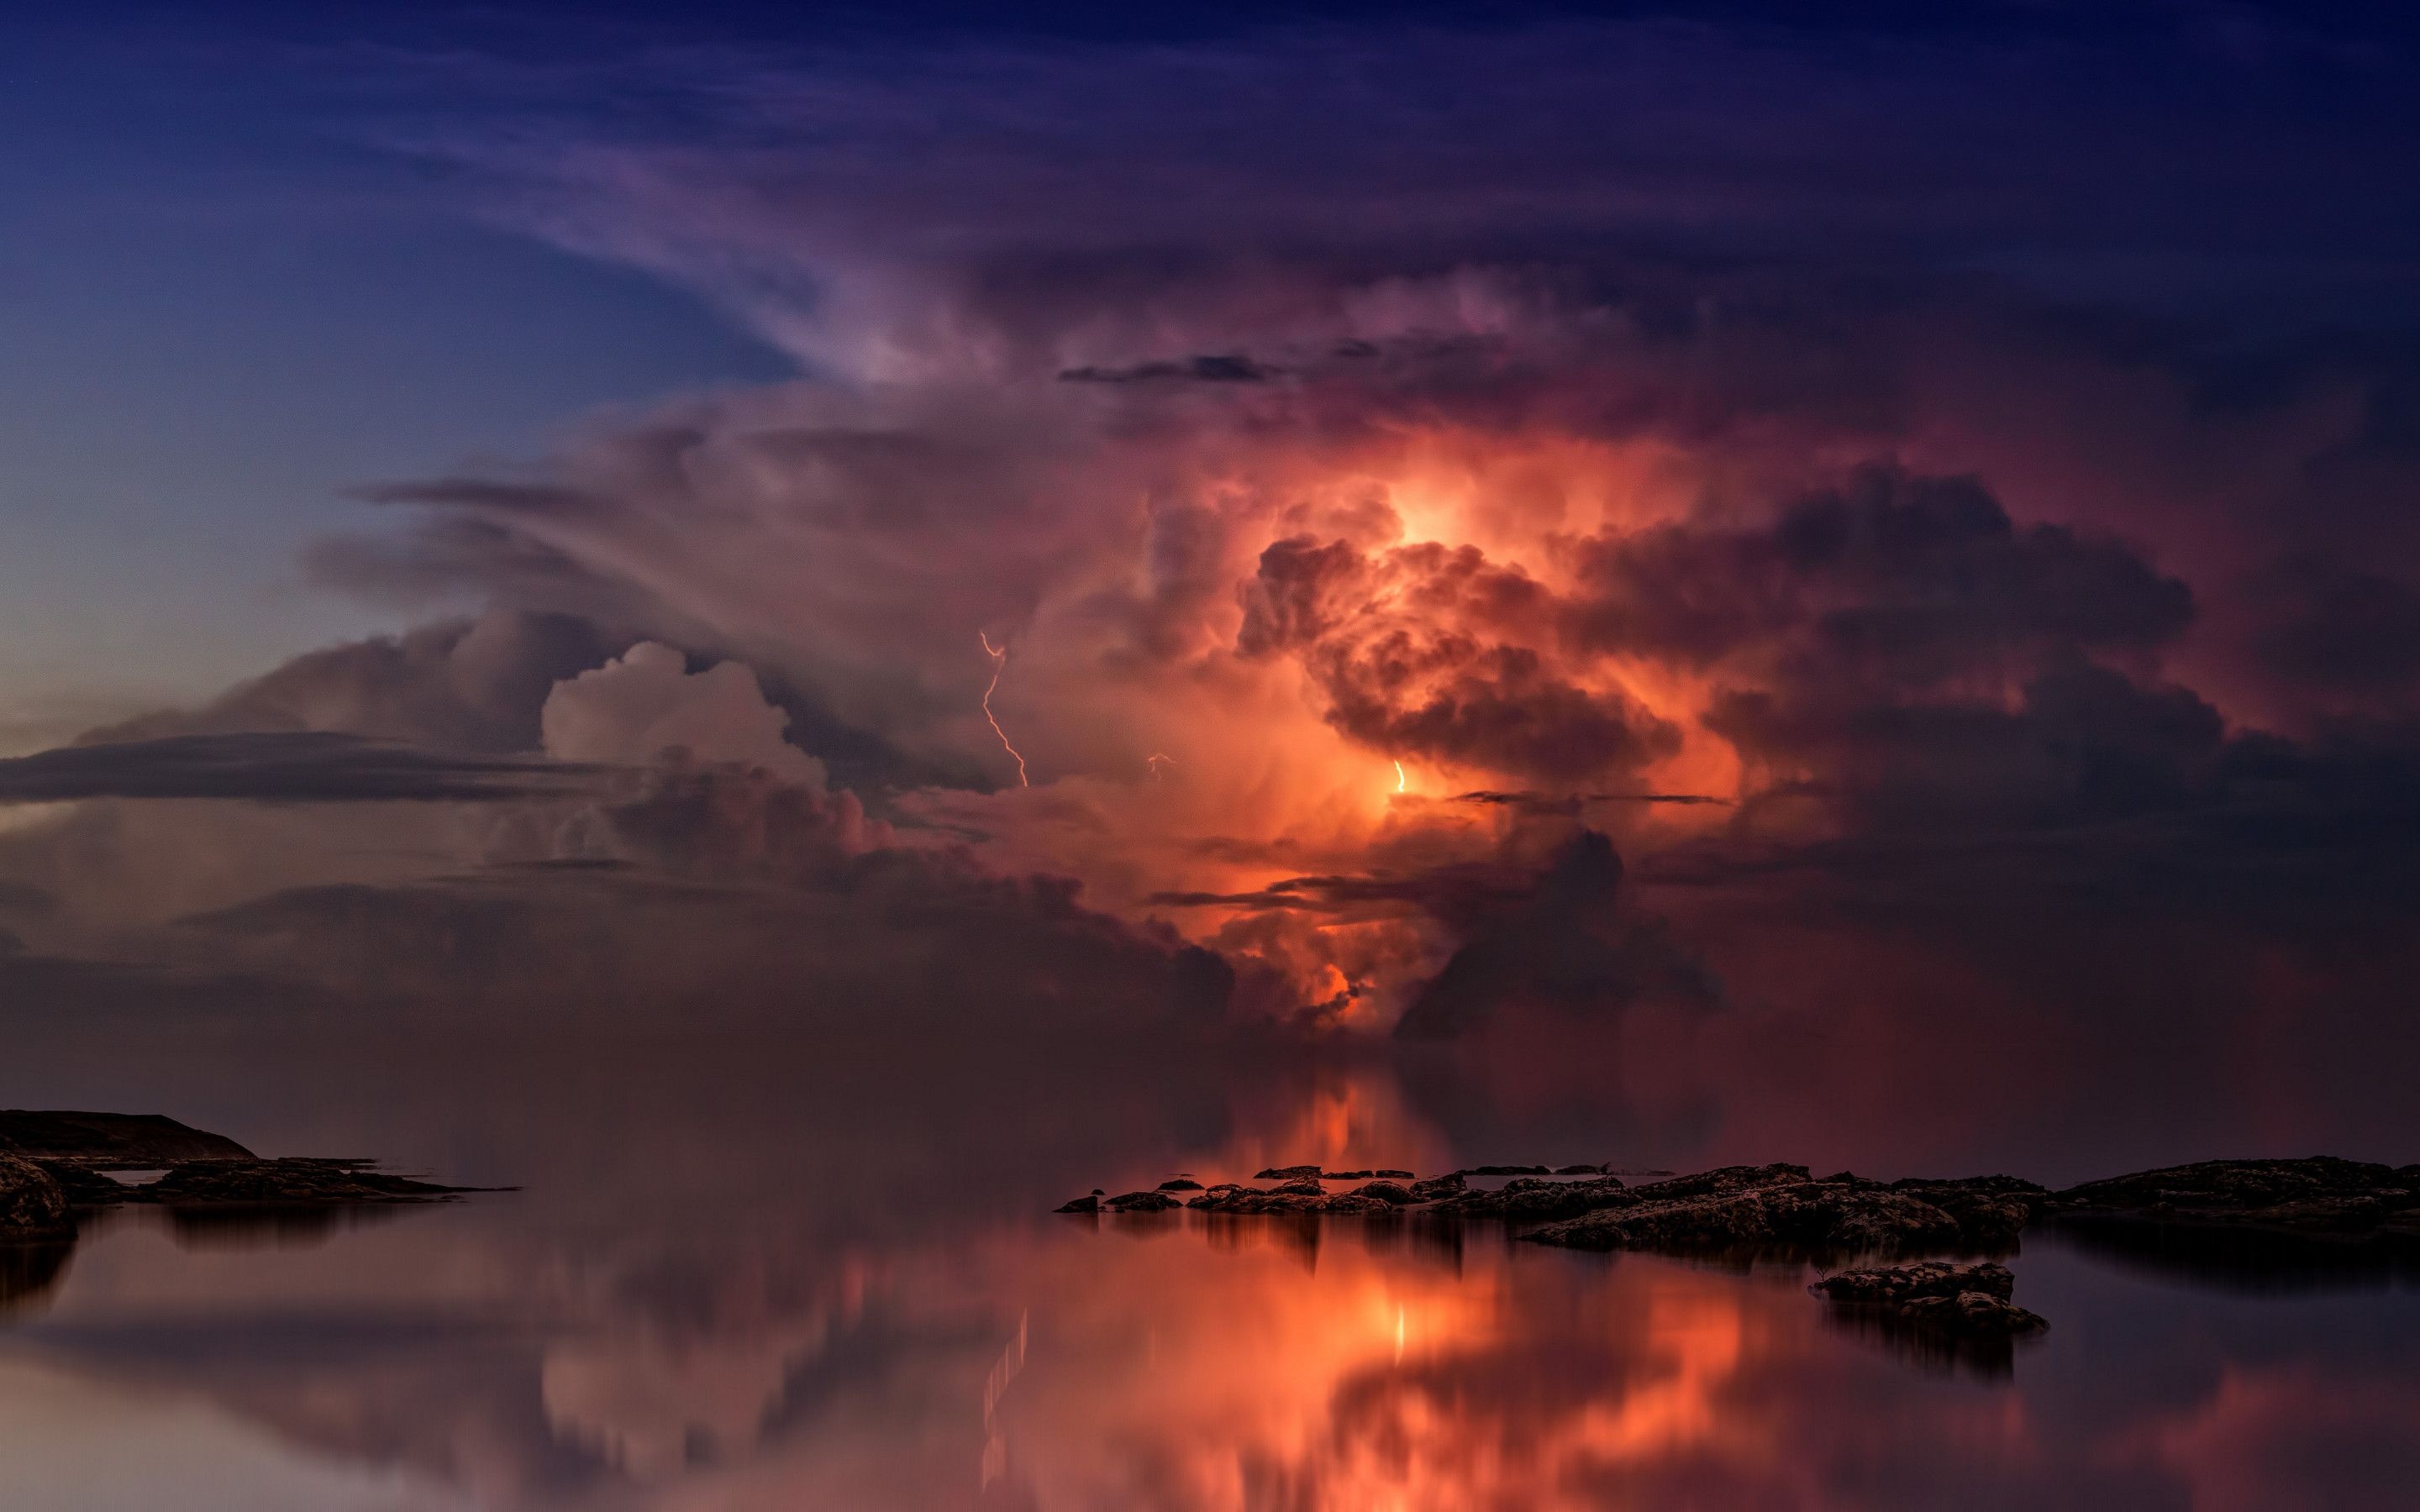 Download wallpaper: Lightning and thunderstorm in the sky 2880x1800